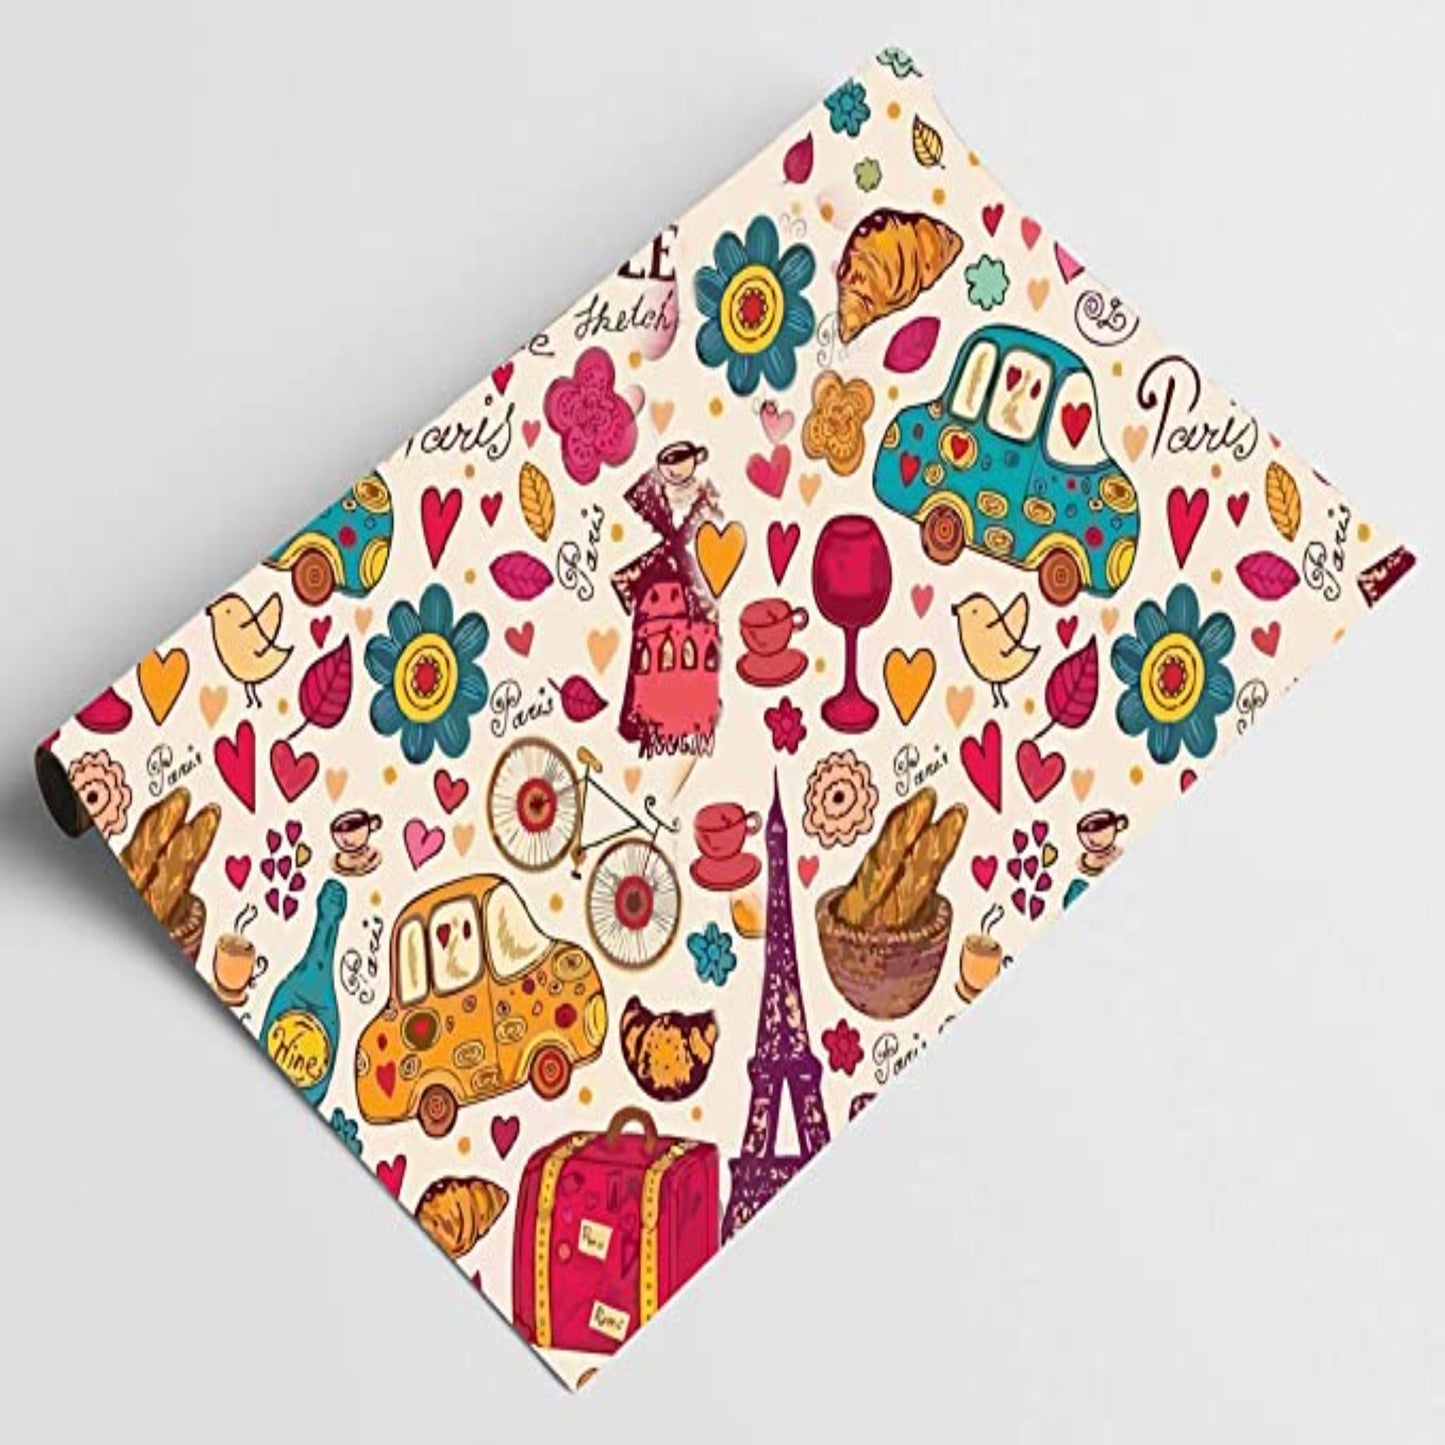 Accuprints | Design Coffee Paris | Size 20 X 30 inch | Wrapping Paper Sheets for Birthday Gift